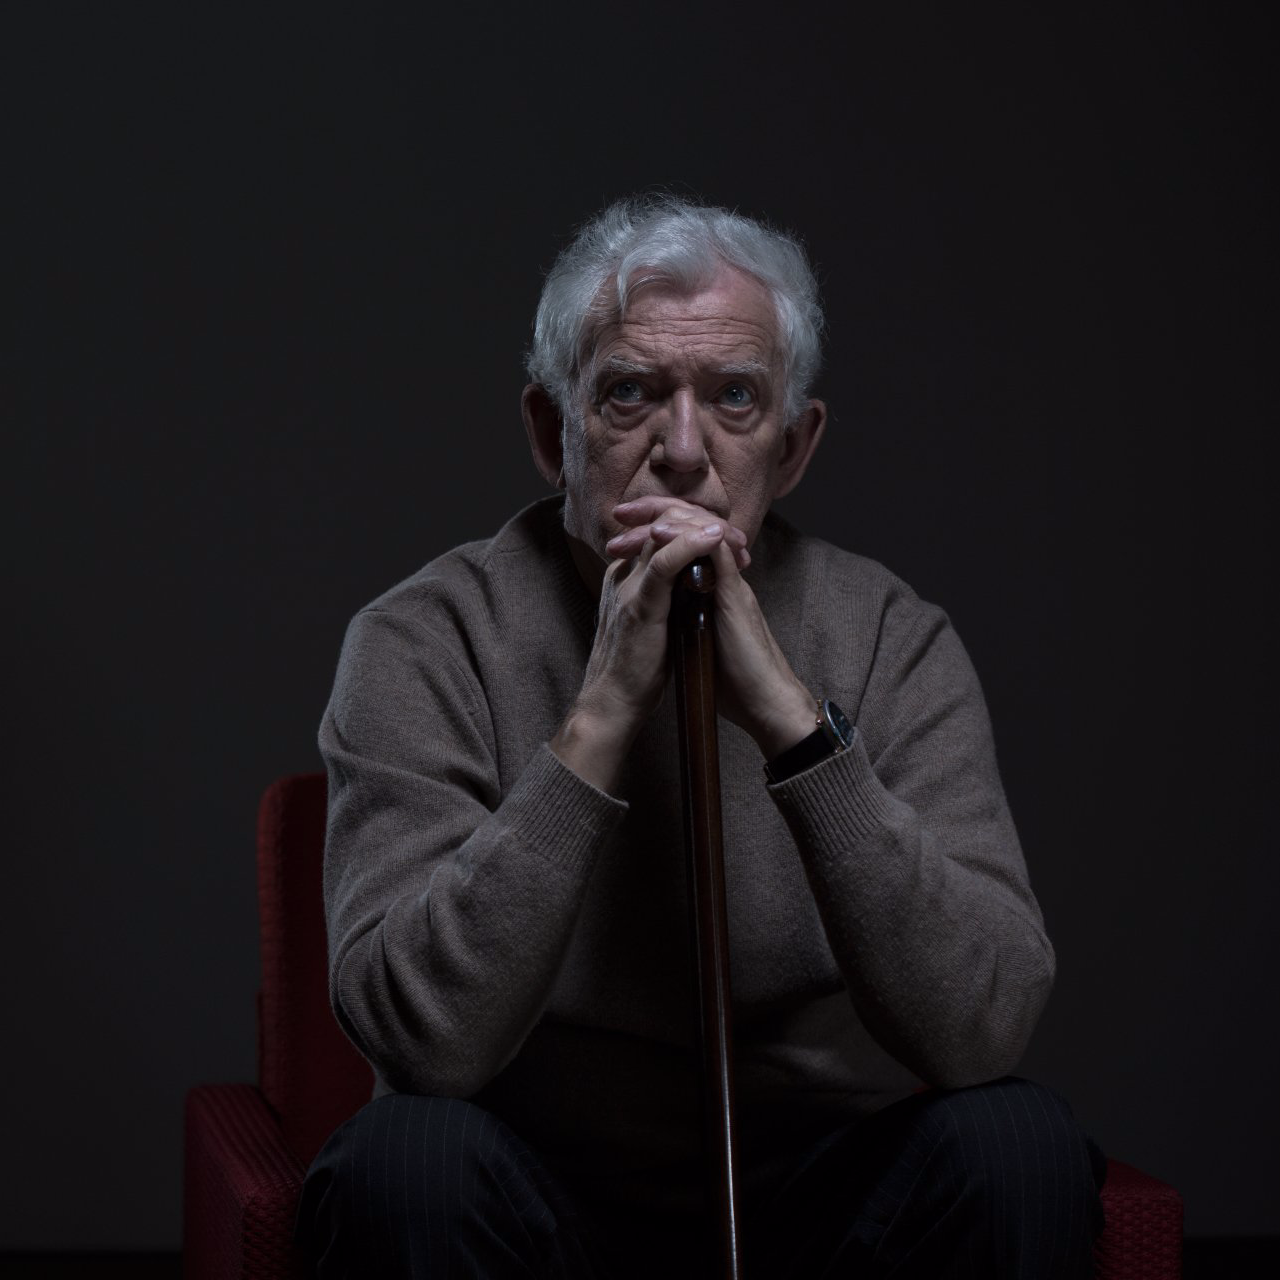 Depression is common among seniors and the elderly